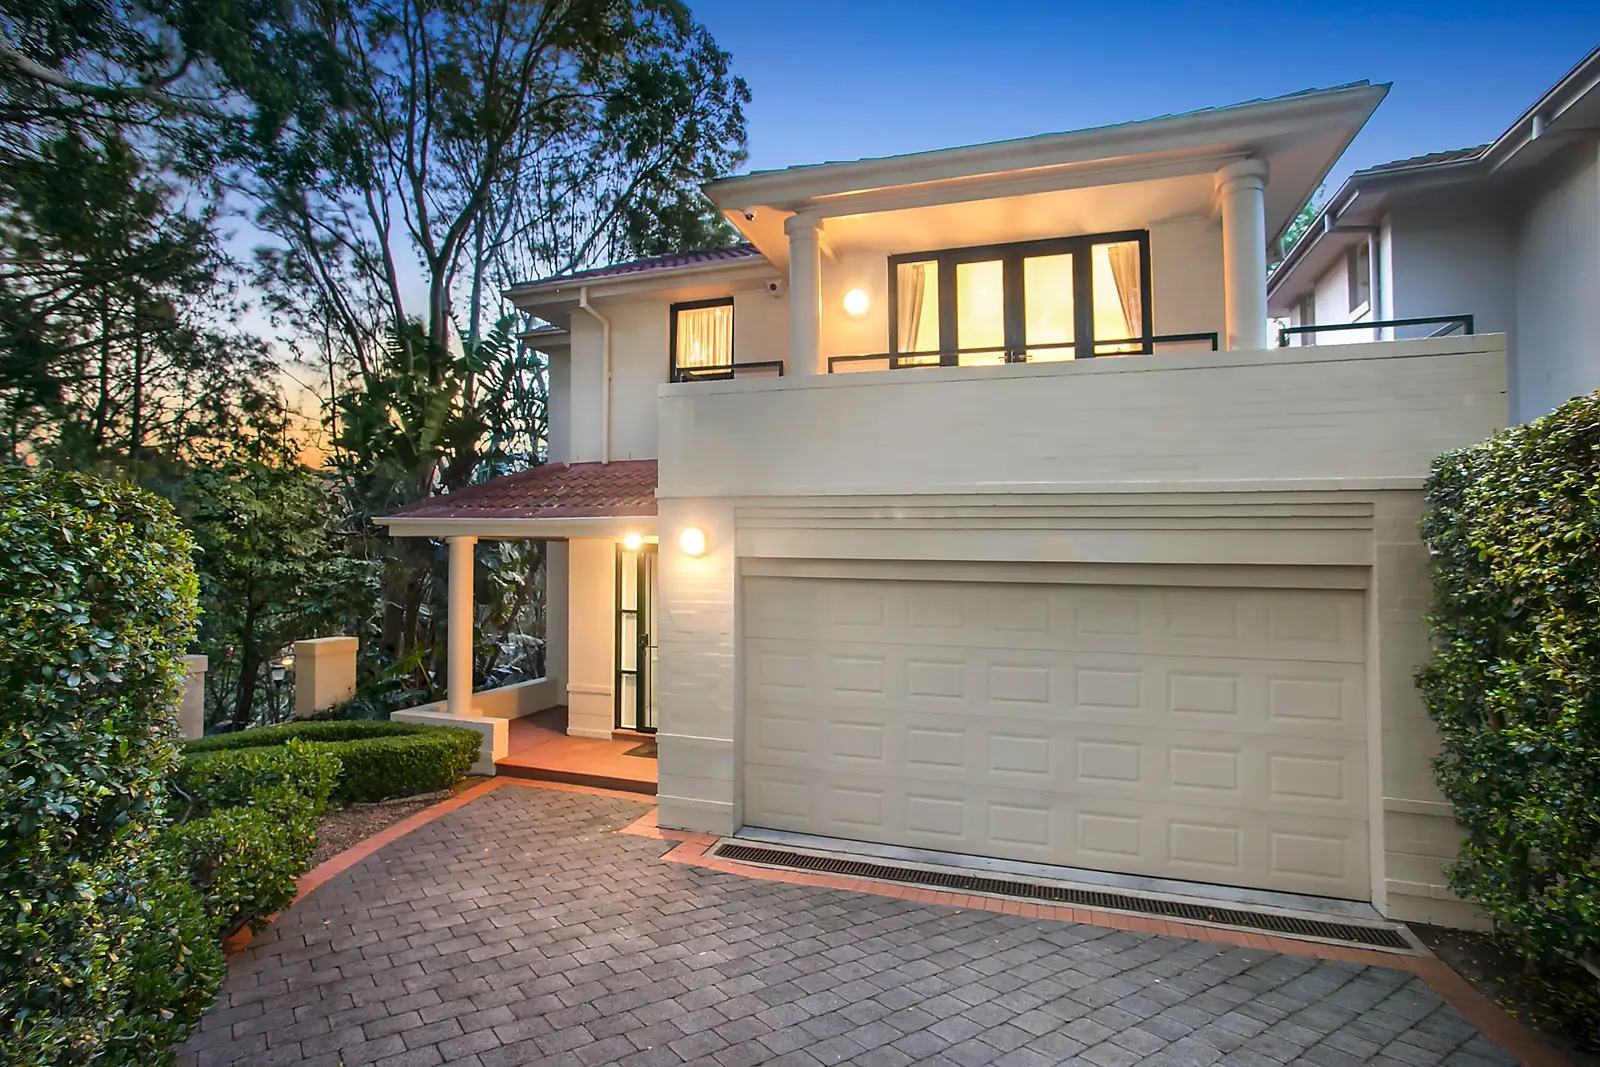 Photo #1: 32 Balfour Road, Kensington - Sold by Sydney Sotheby's International Realty